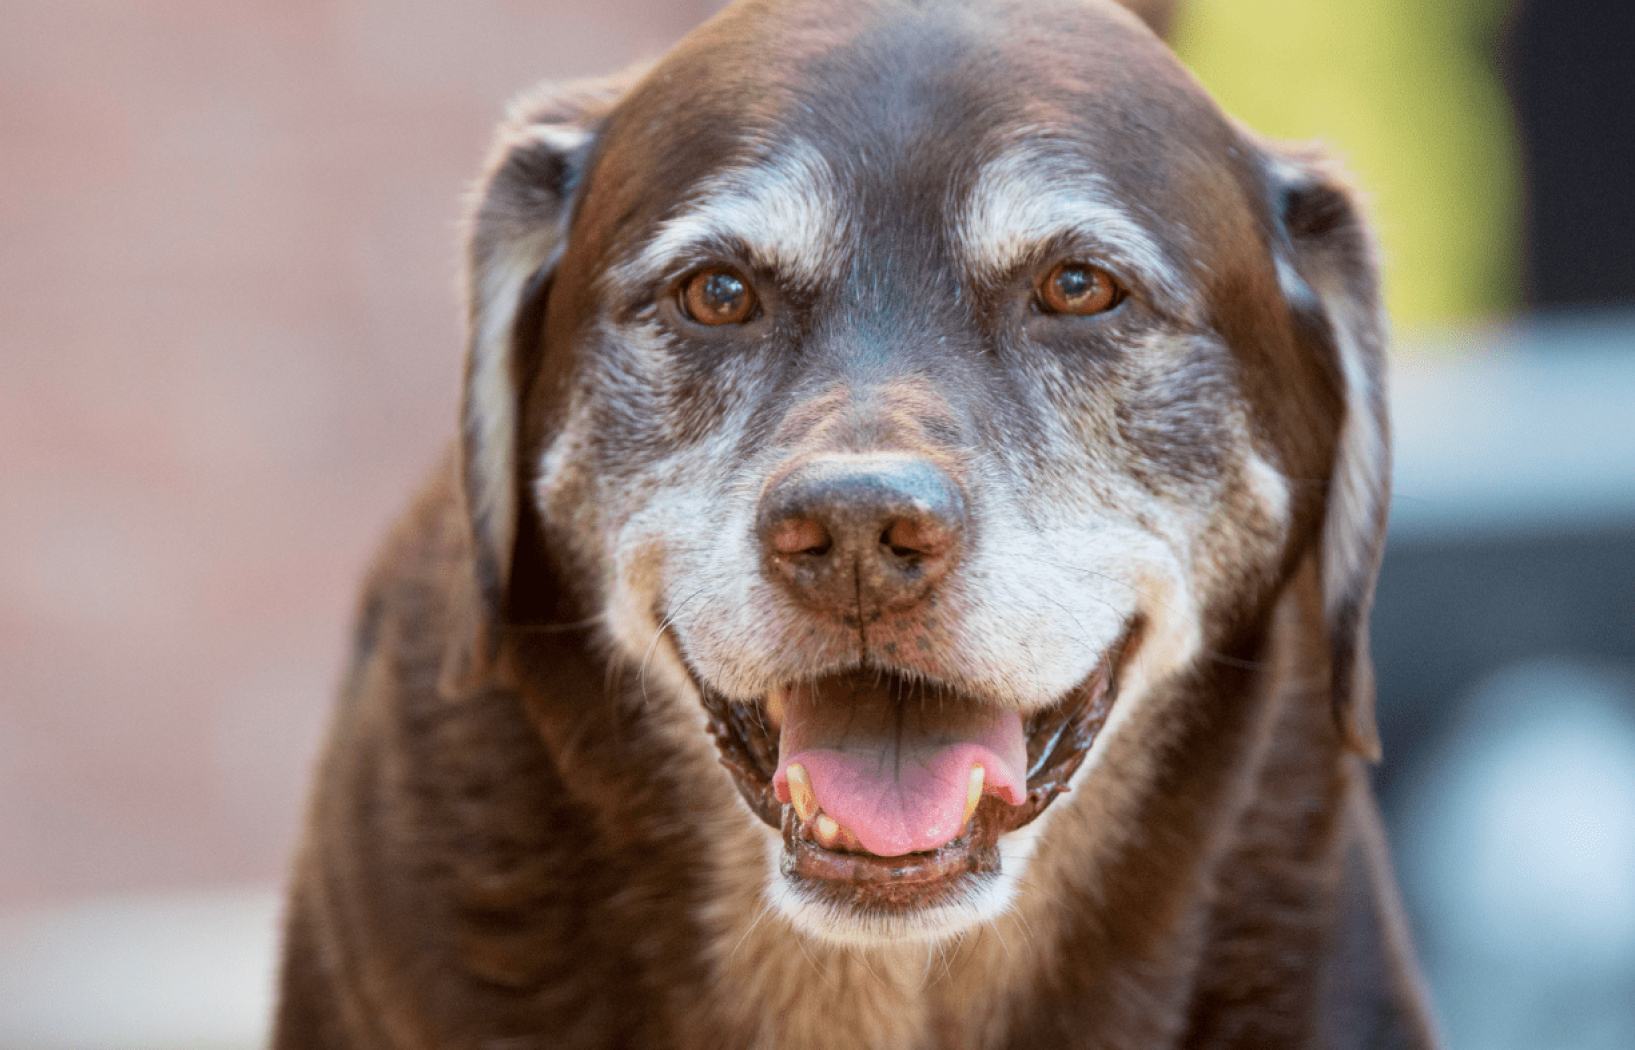 Learn about how animals mature and ways to improve their quality of life as they age.